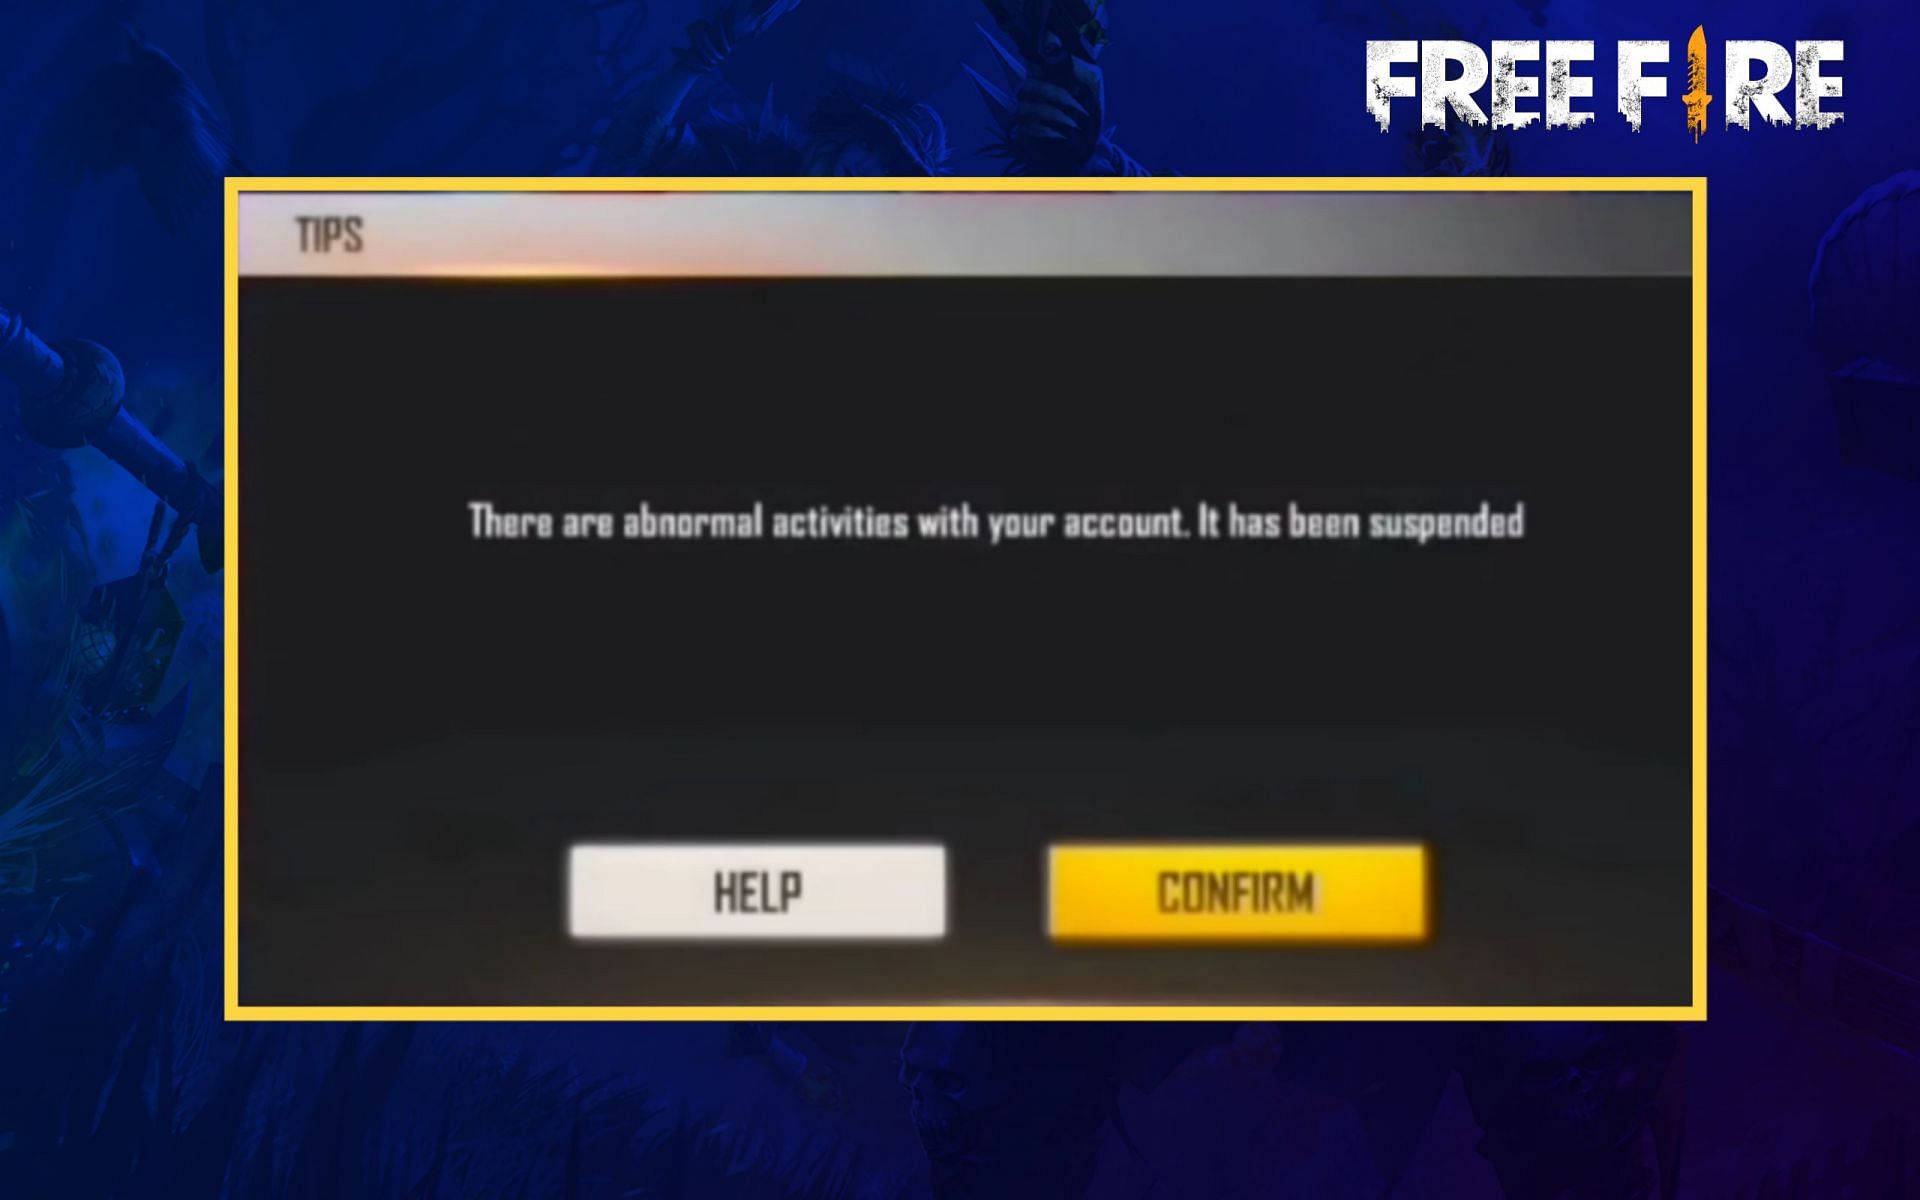 Hacks for unlimited diamond may lead to permanent ban on the Free Fire account (Image via Sportskeeda)